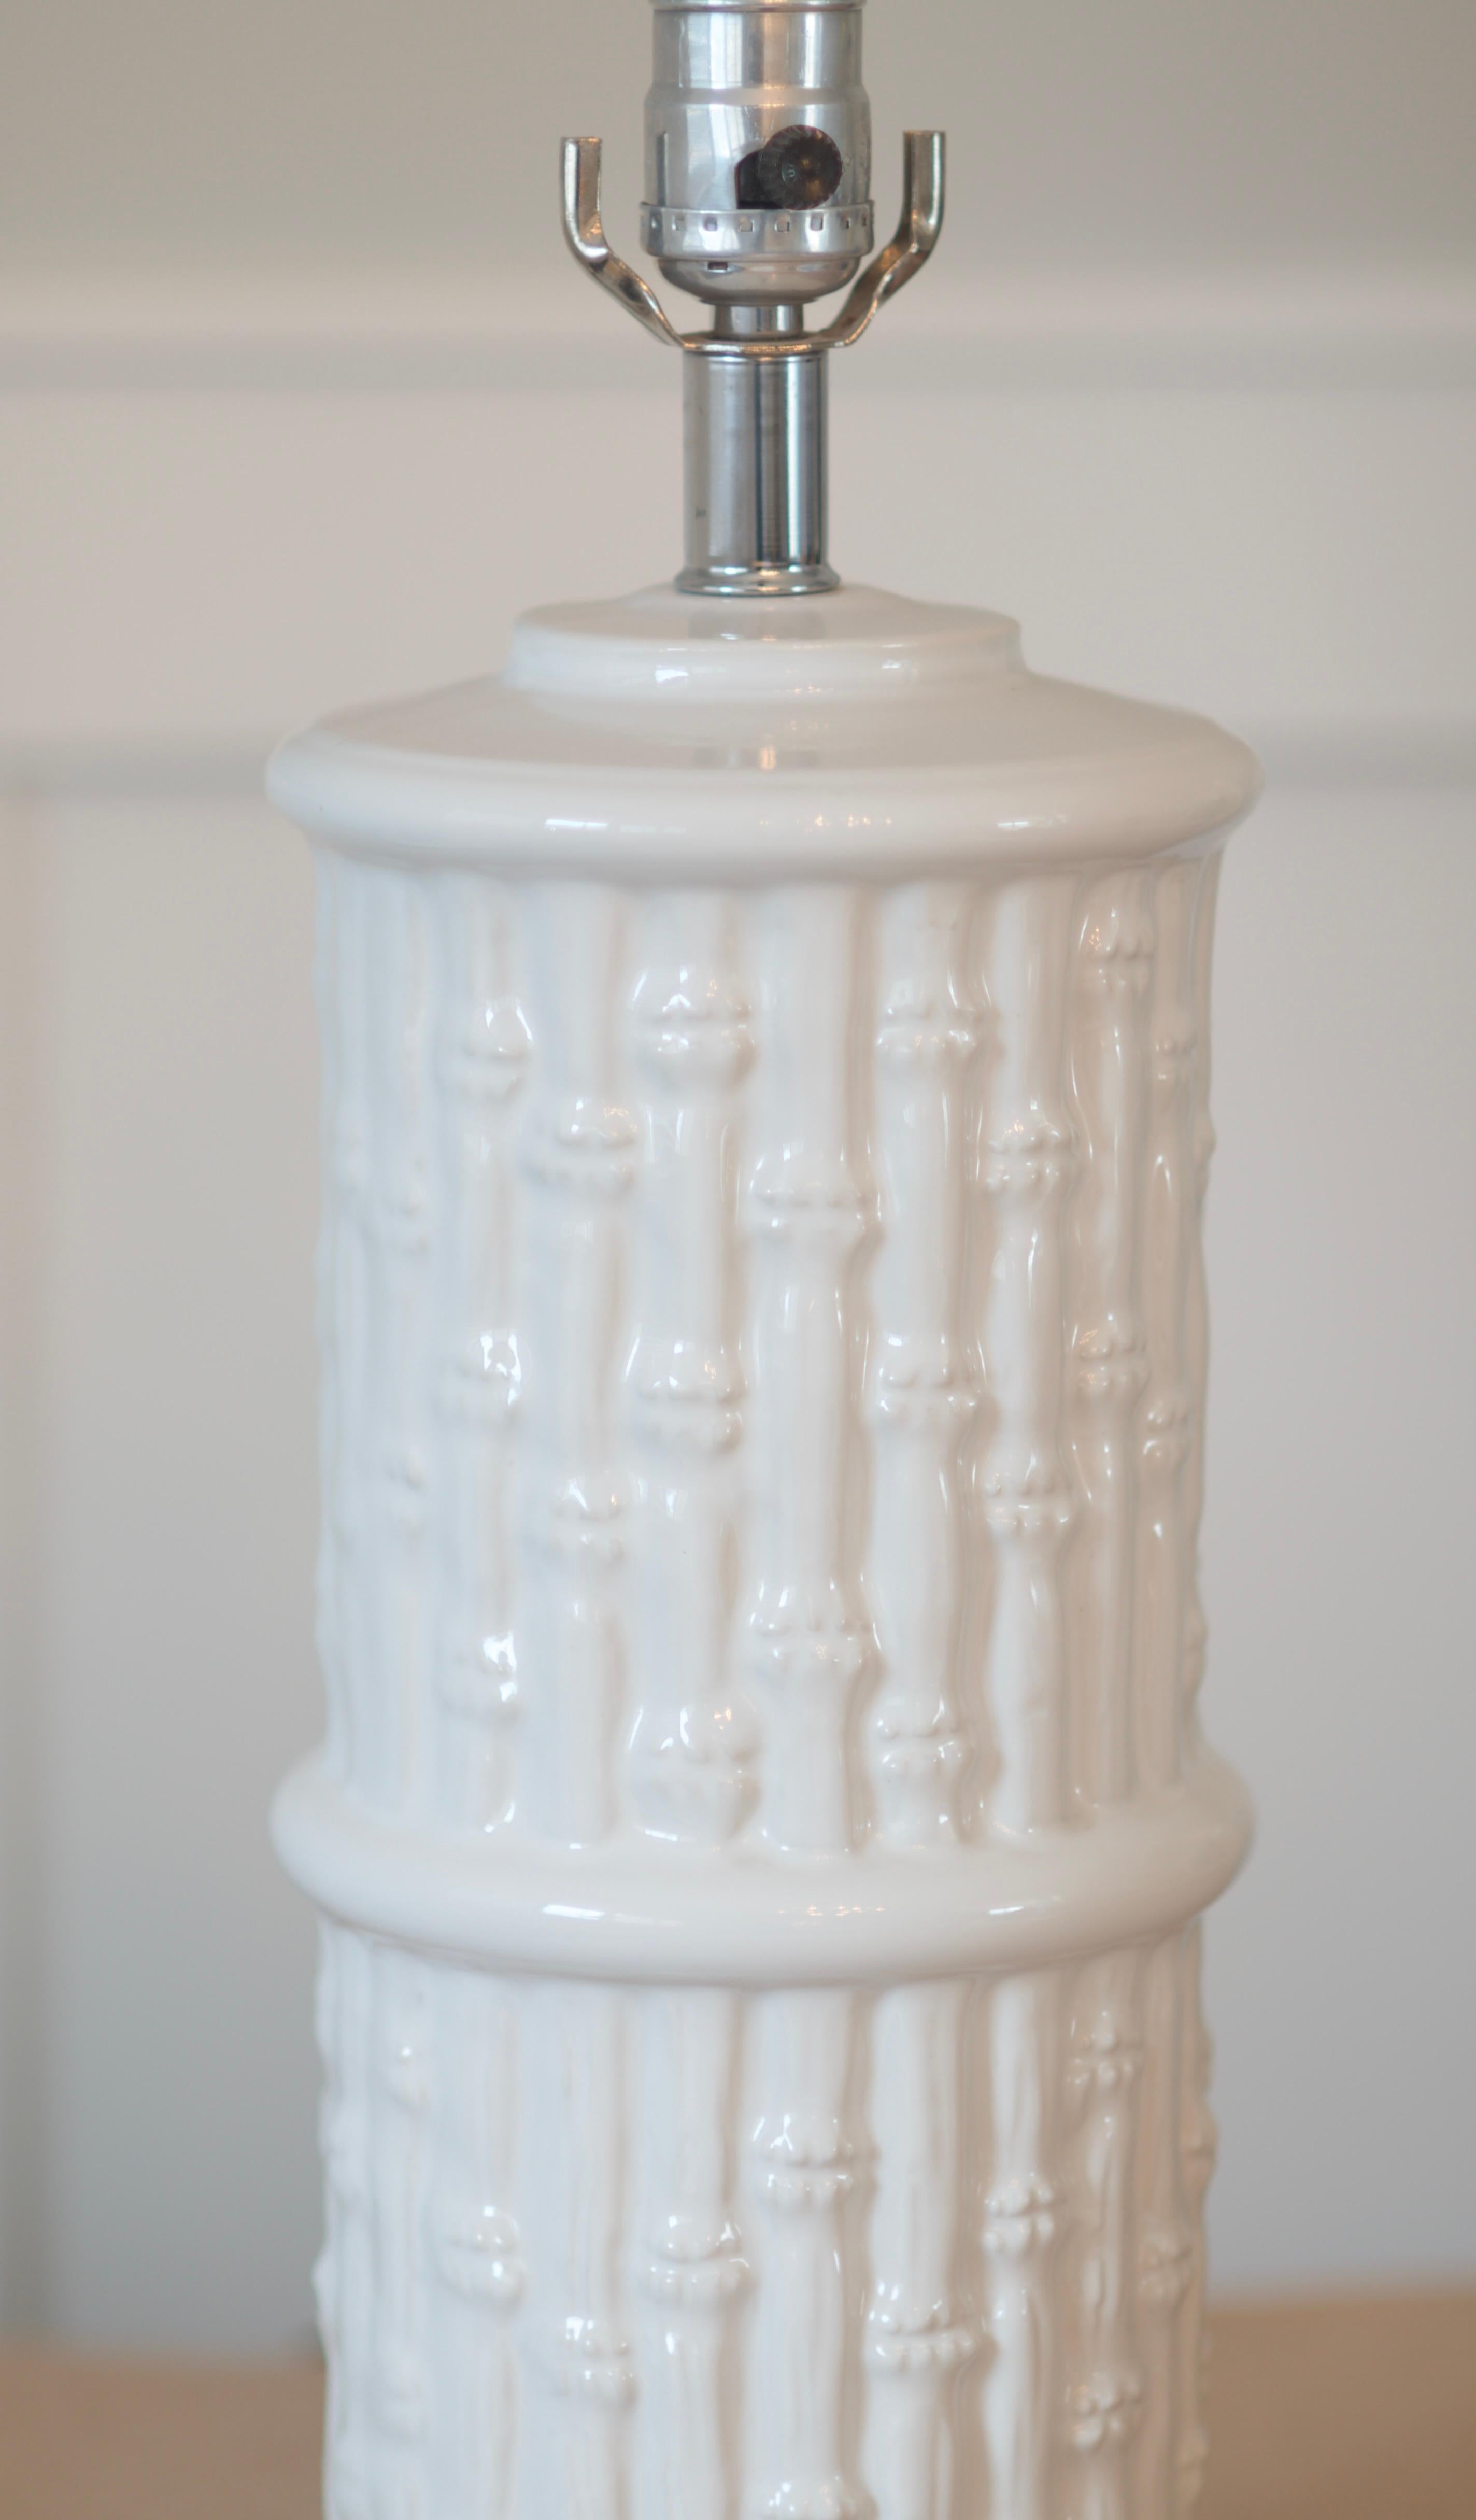 Vintage 1960s Mid-Century Modern White Ceramic Faux Bamboo Table Lamp In Good Condition For Sale In Draper, UT